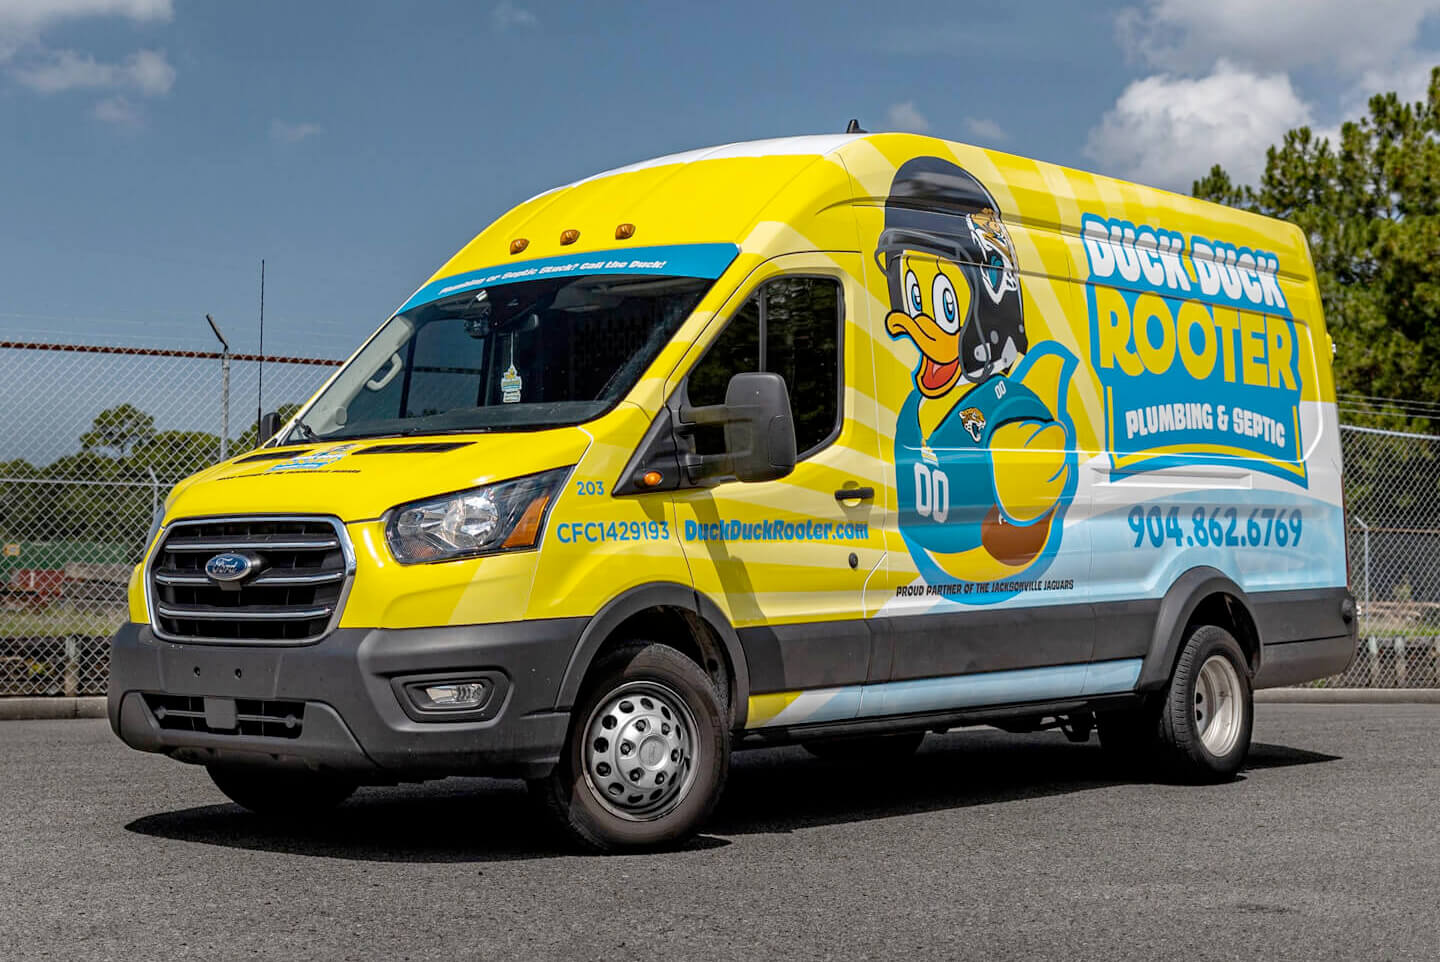 A cargo van wrapped in yellow and blue with local business graphics.